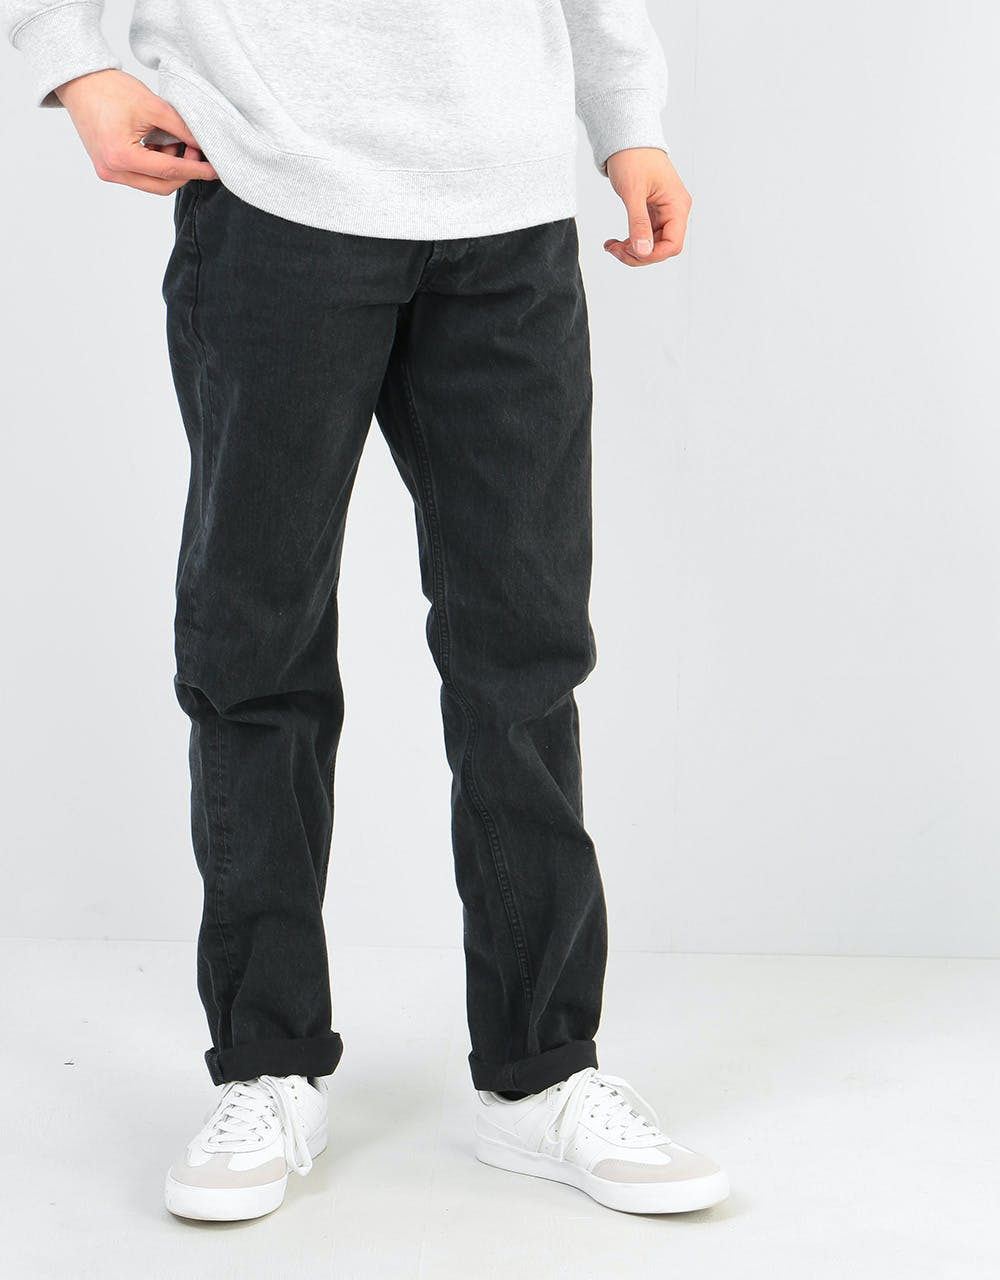 Carhartt WIP Texas Pant - Black (Stone Washed)